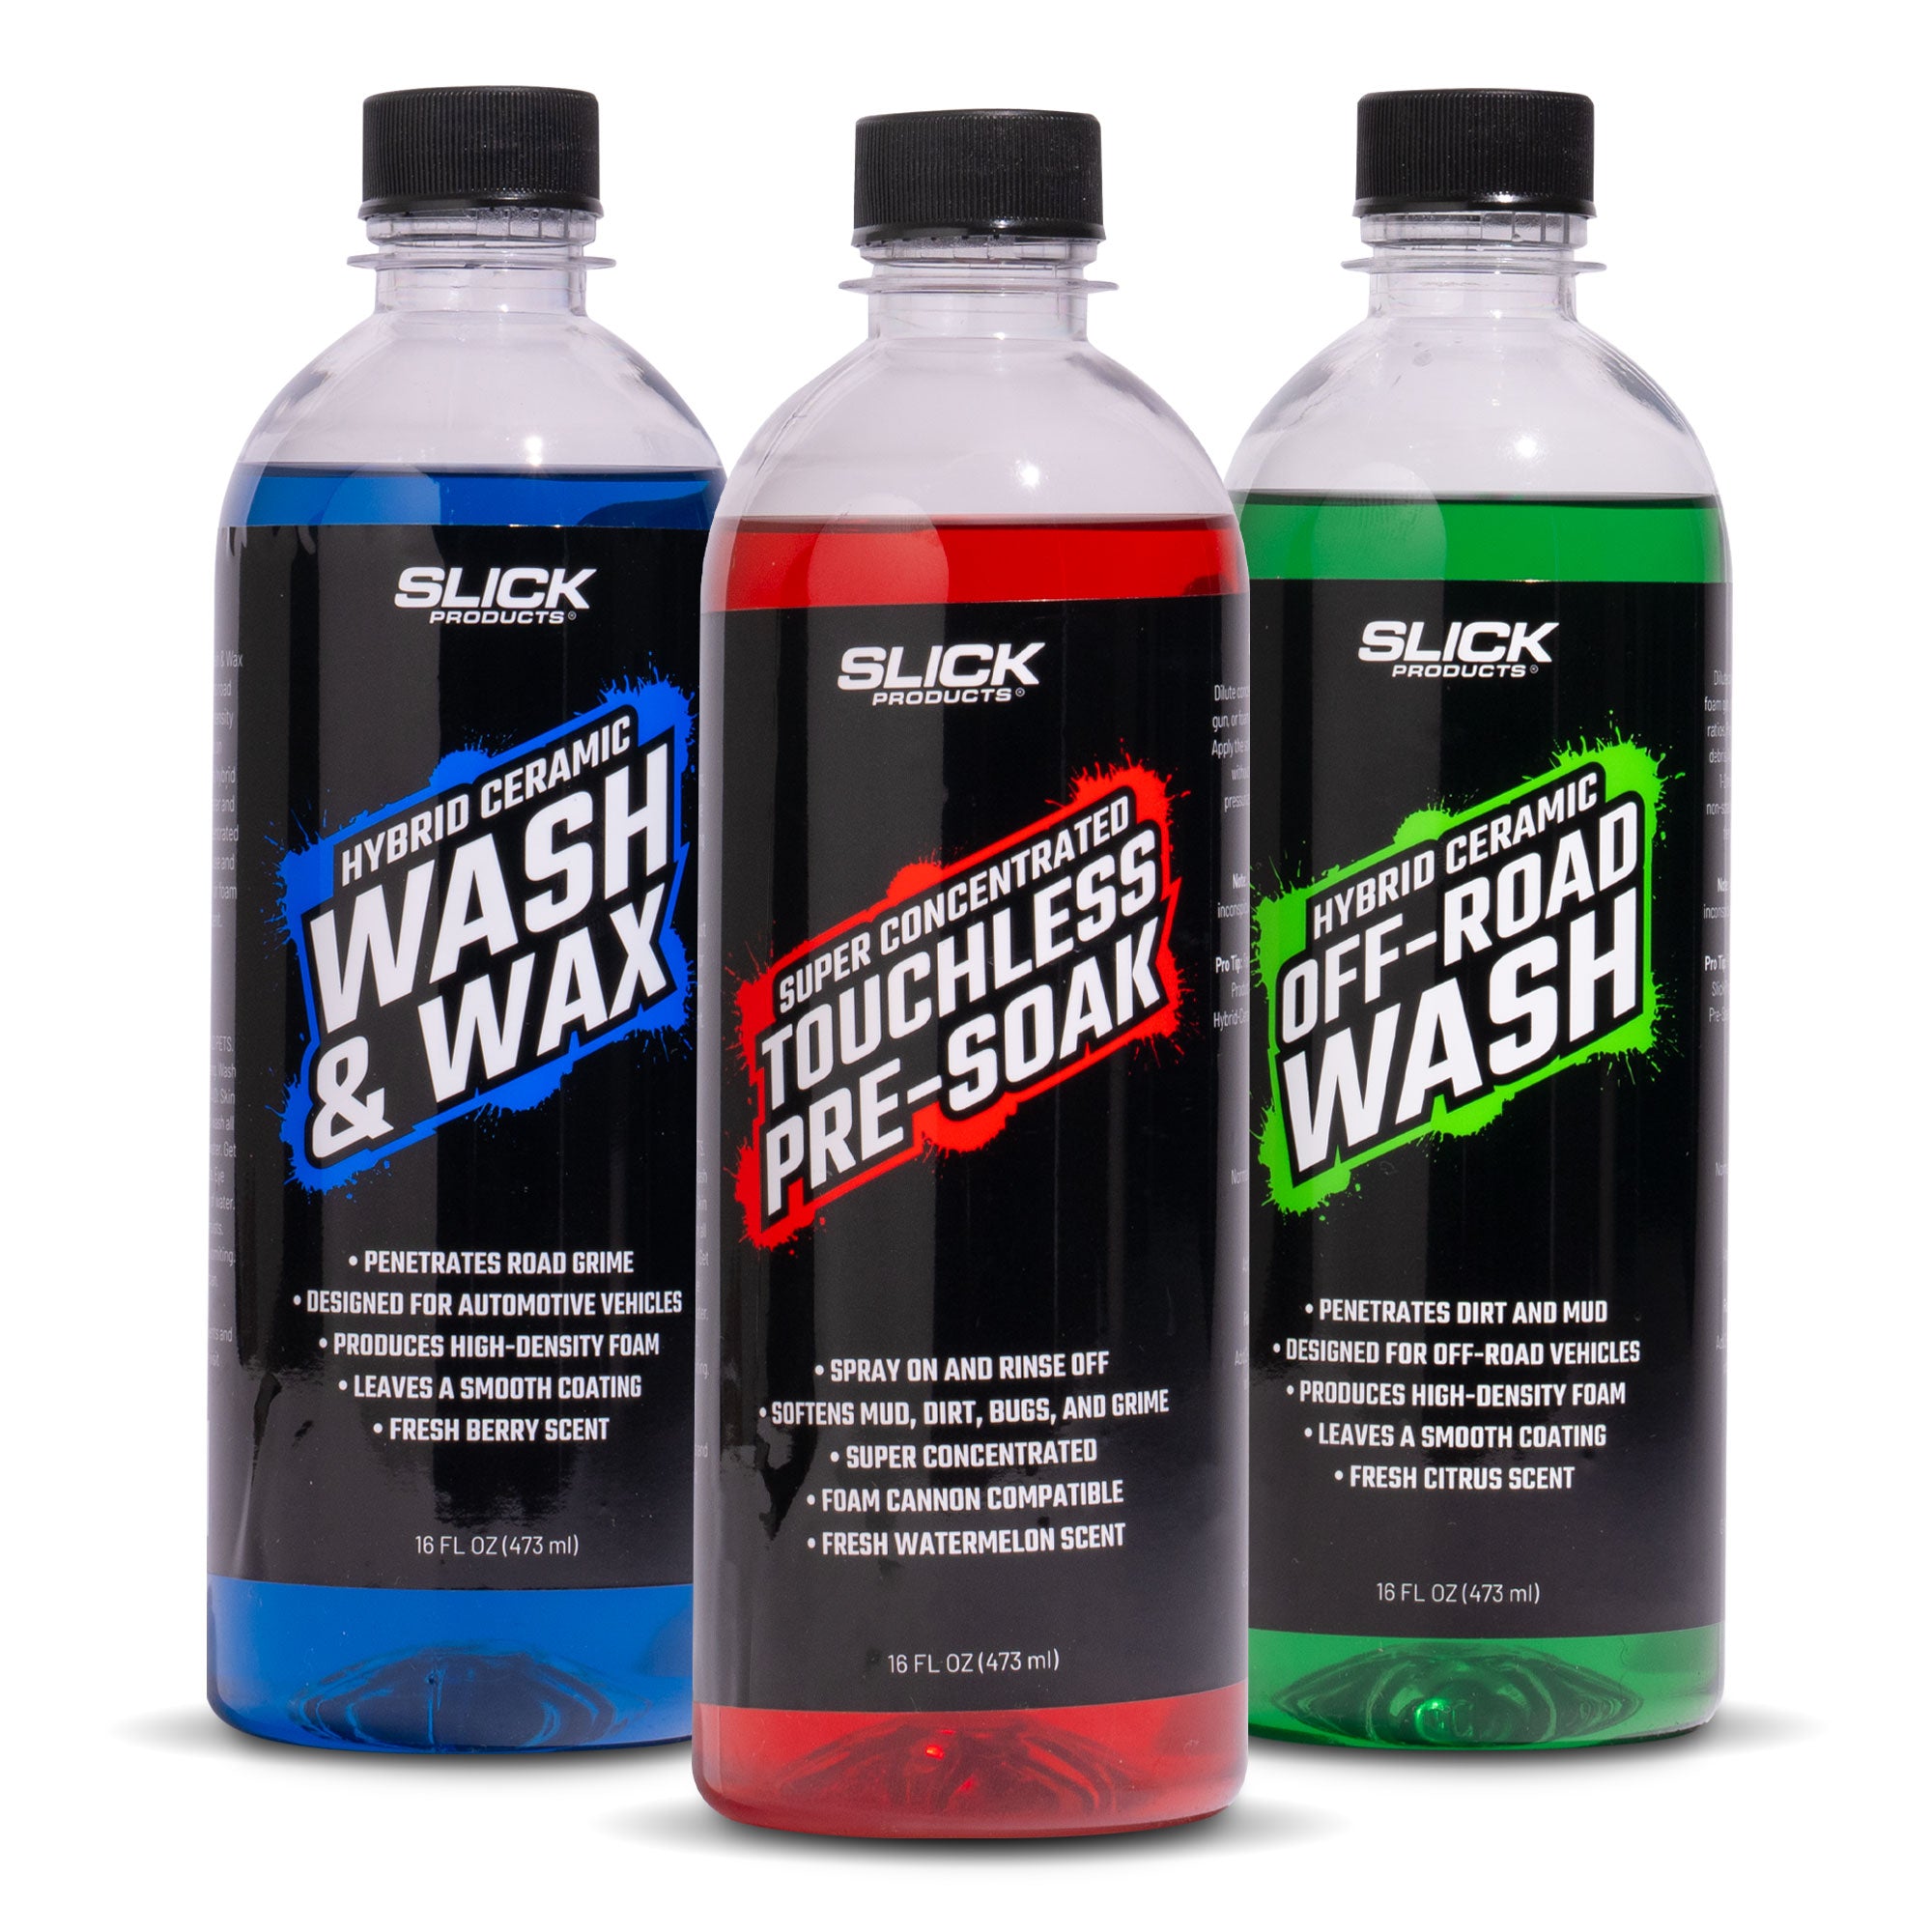 Slick Products Pressure Washer Foam Cannon